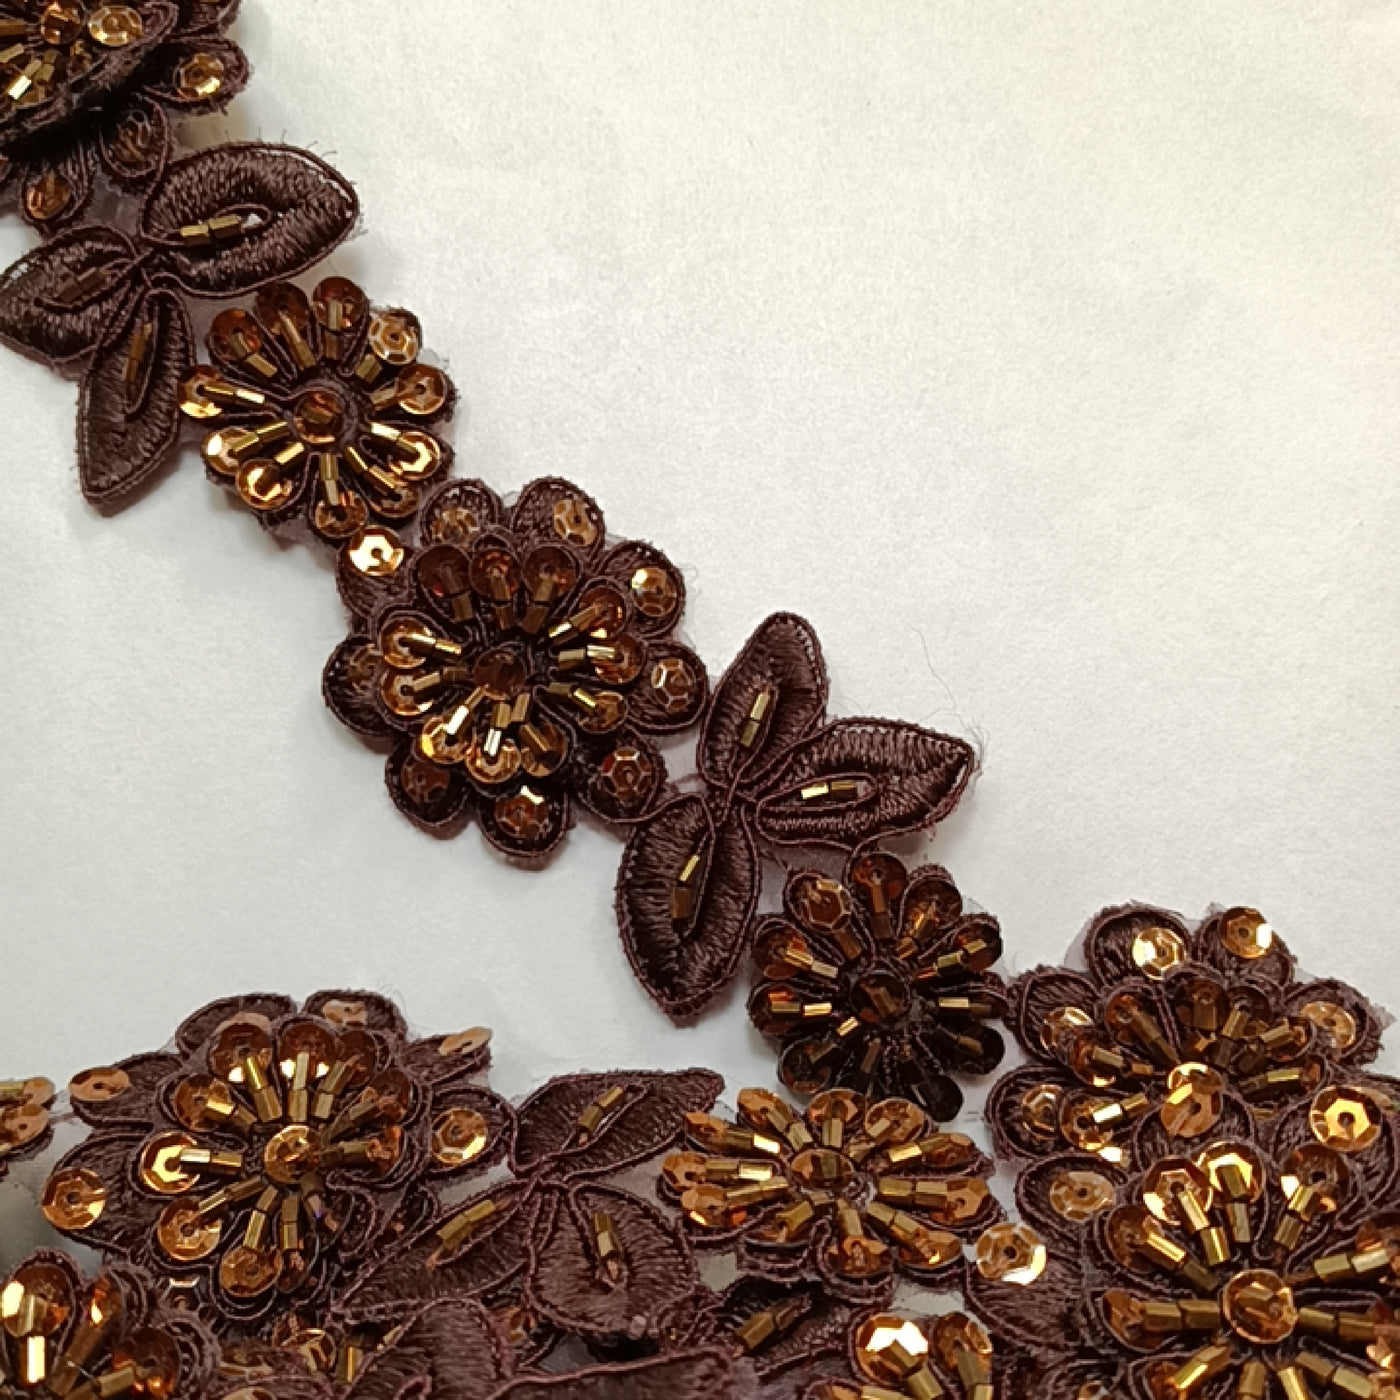 3D Floral Corded, Beaded & Embroidered Chocolate Trimming. Lace Usa